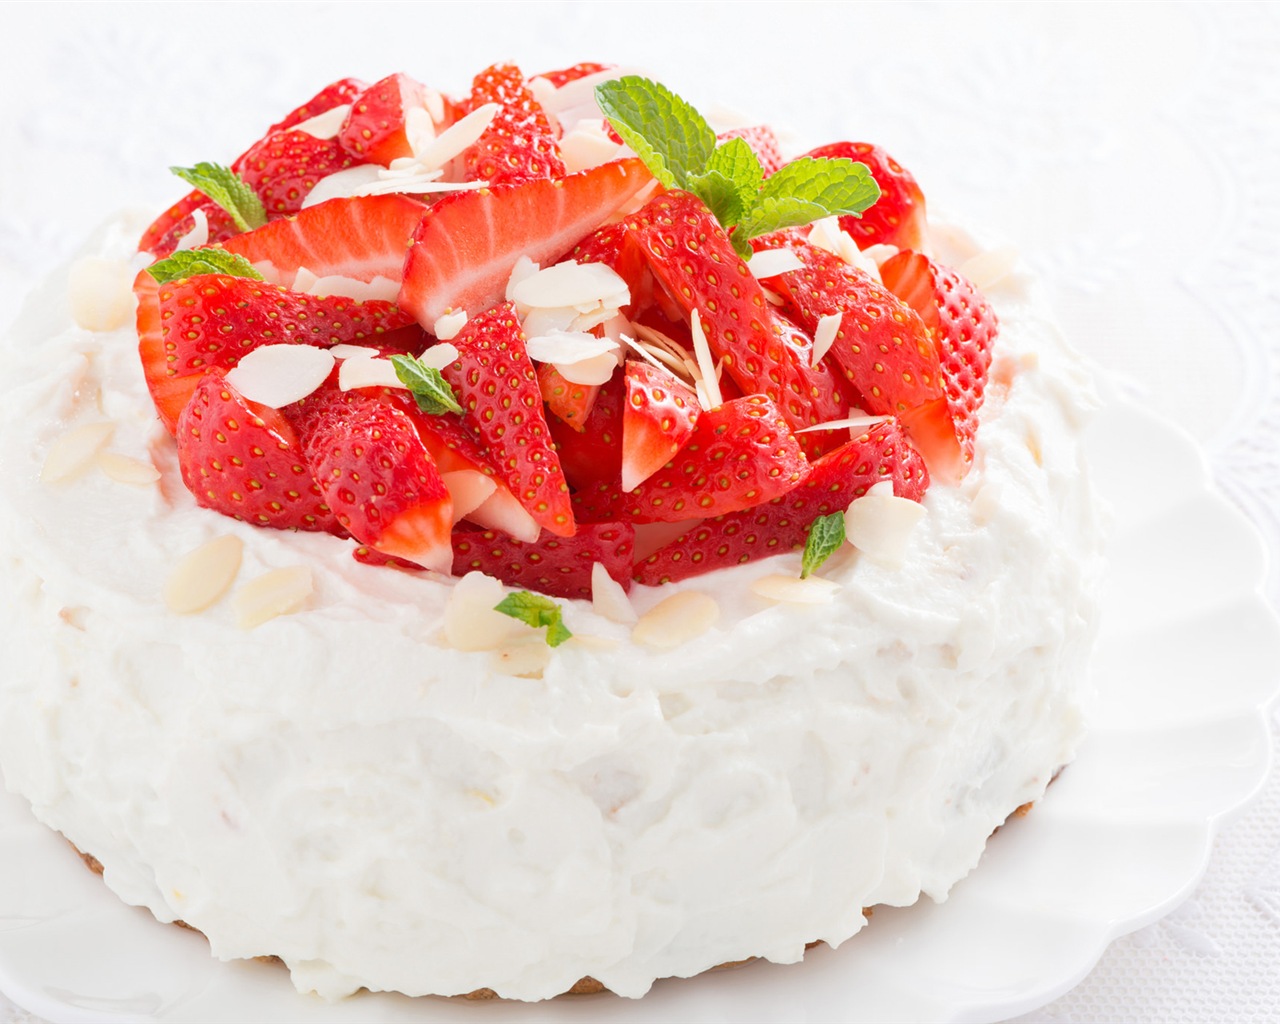 Delicious strawberry cake HD wallpapers #19 - 1280x1024